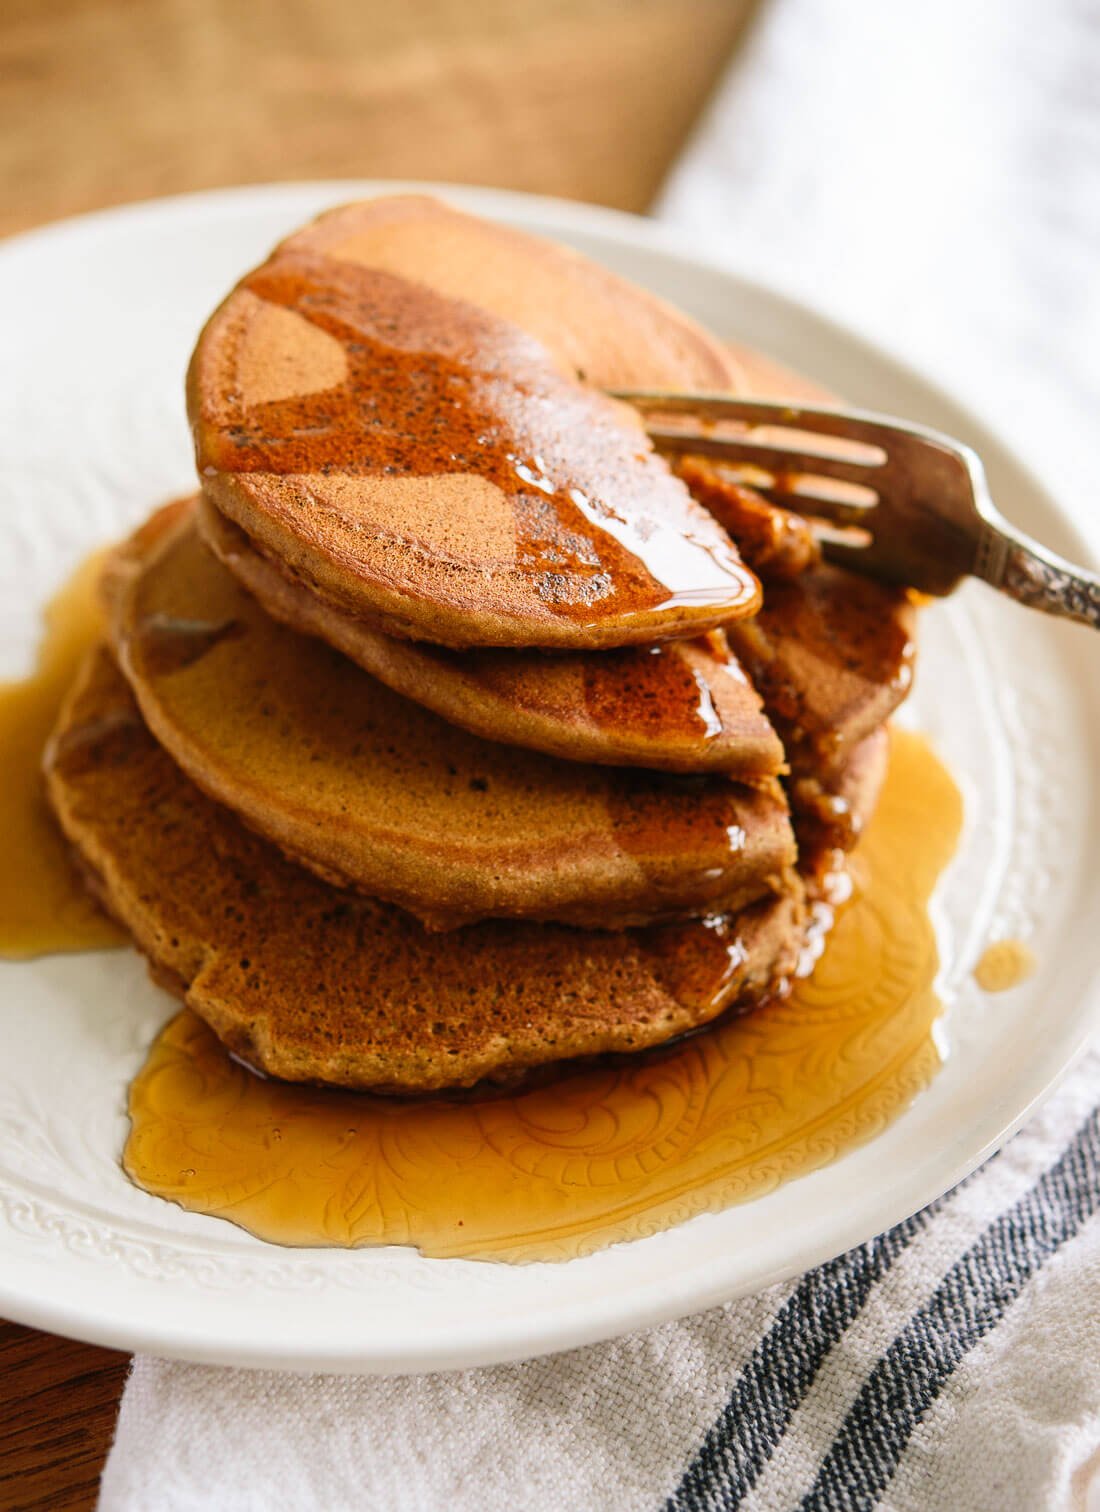 Fluffy and wholesome gingerbread pancakes! Get the recipe at cookieandkate.com